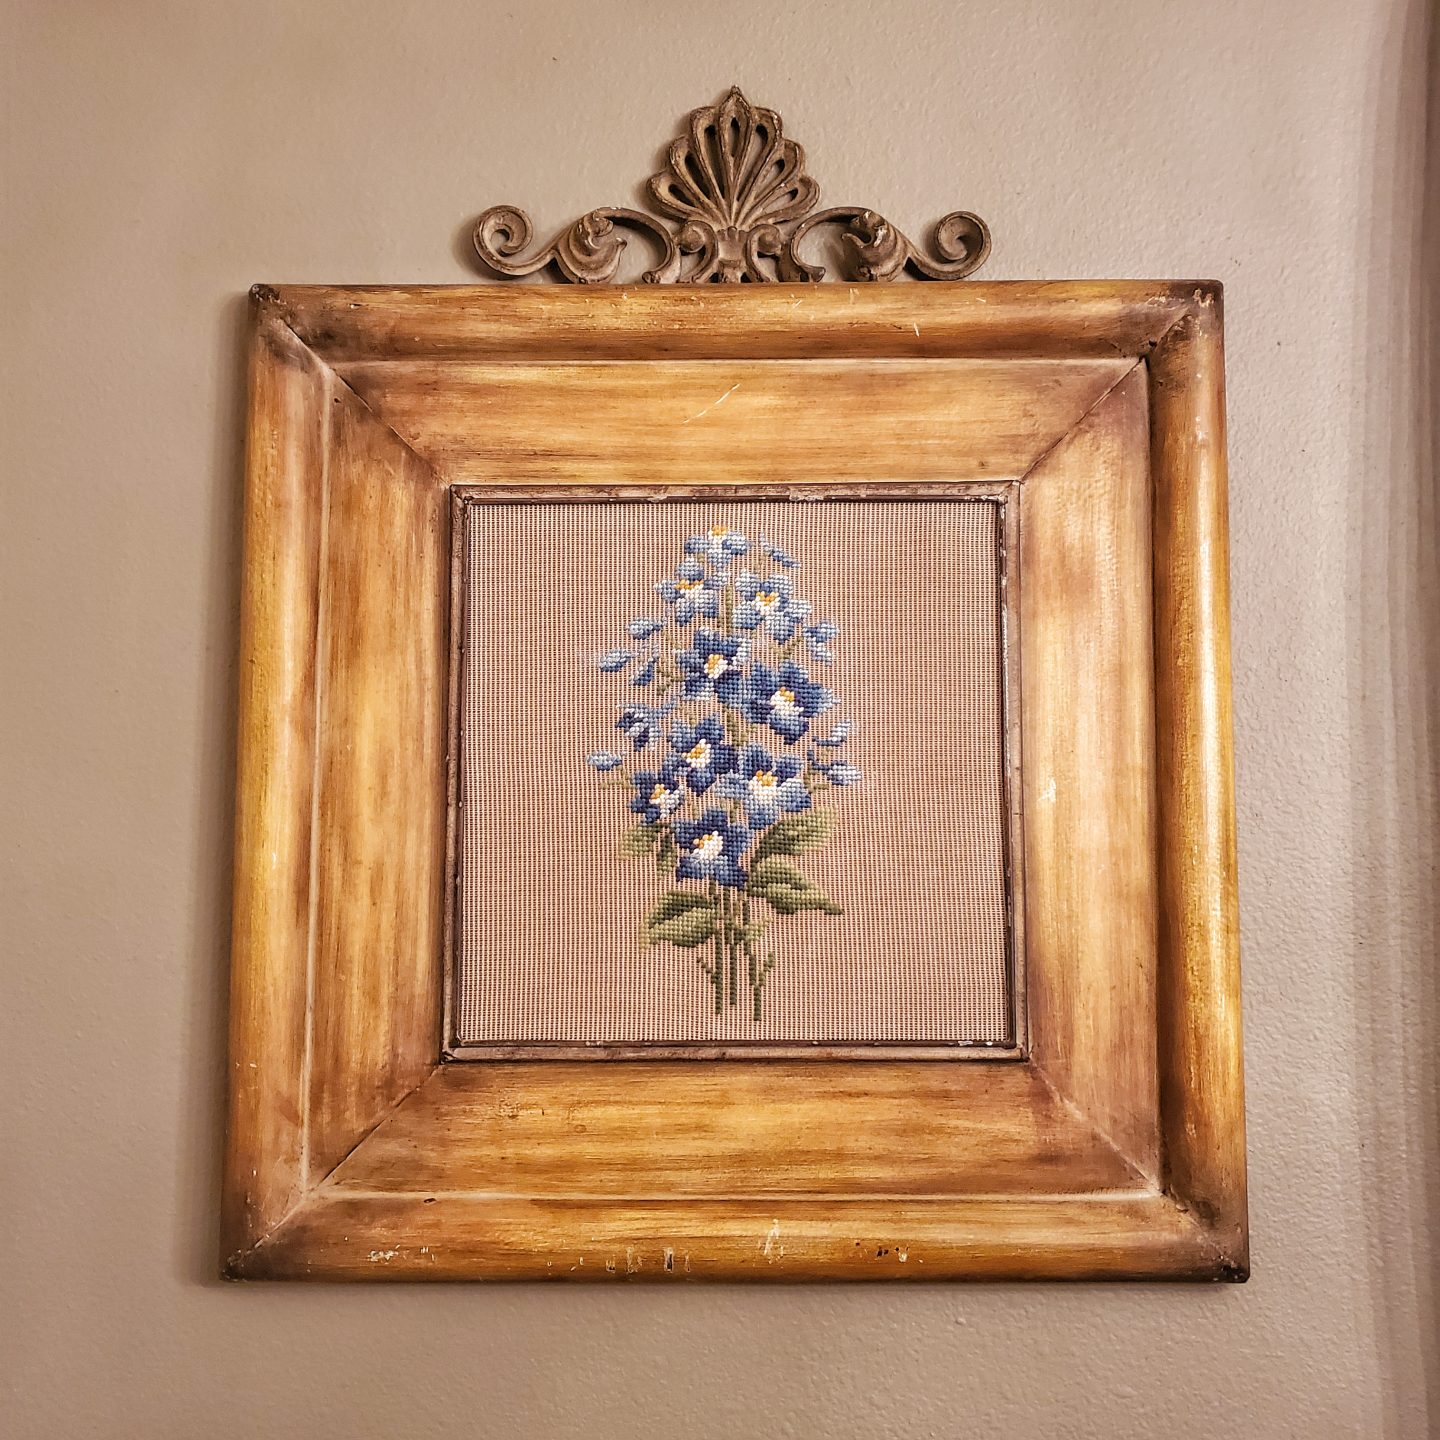 Metal frame that looks like wood. Blue floral embroidered piece inside frame. Found at a thrift store.